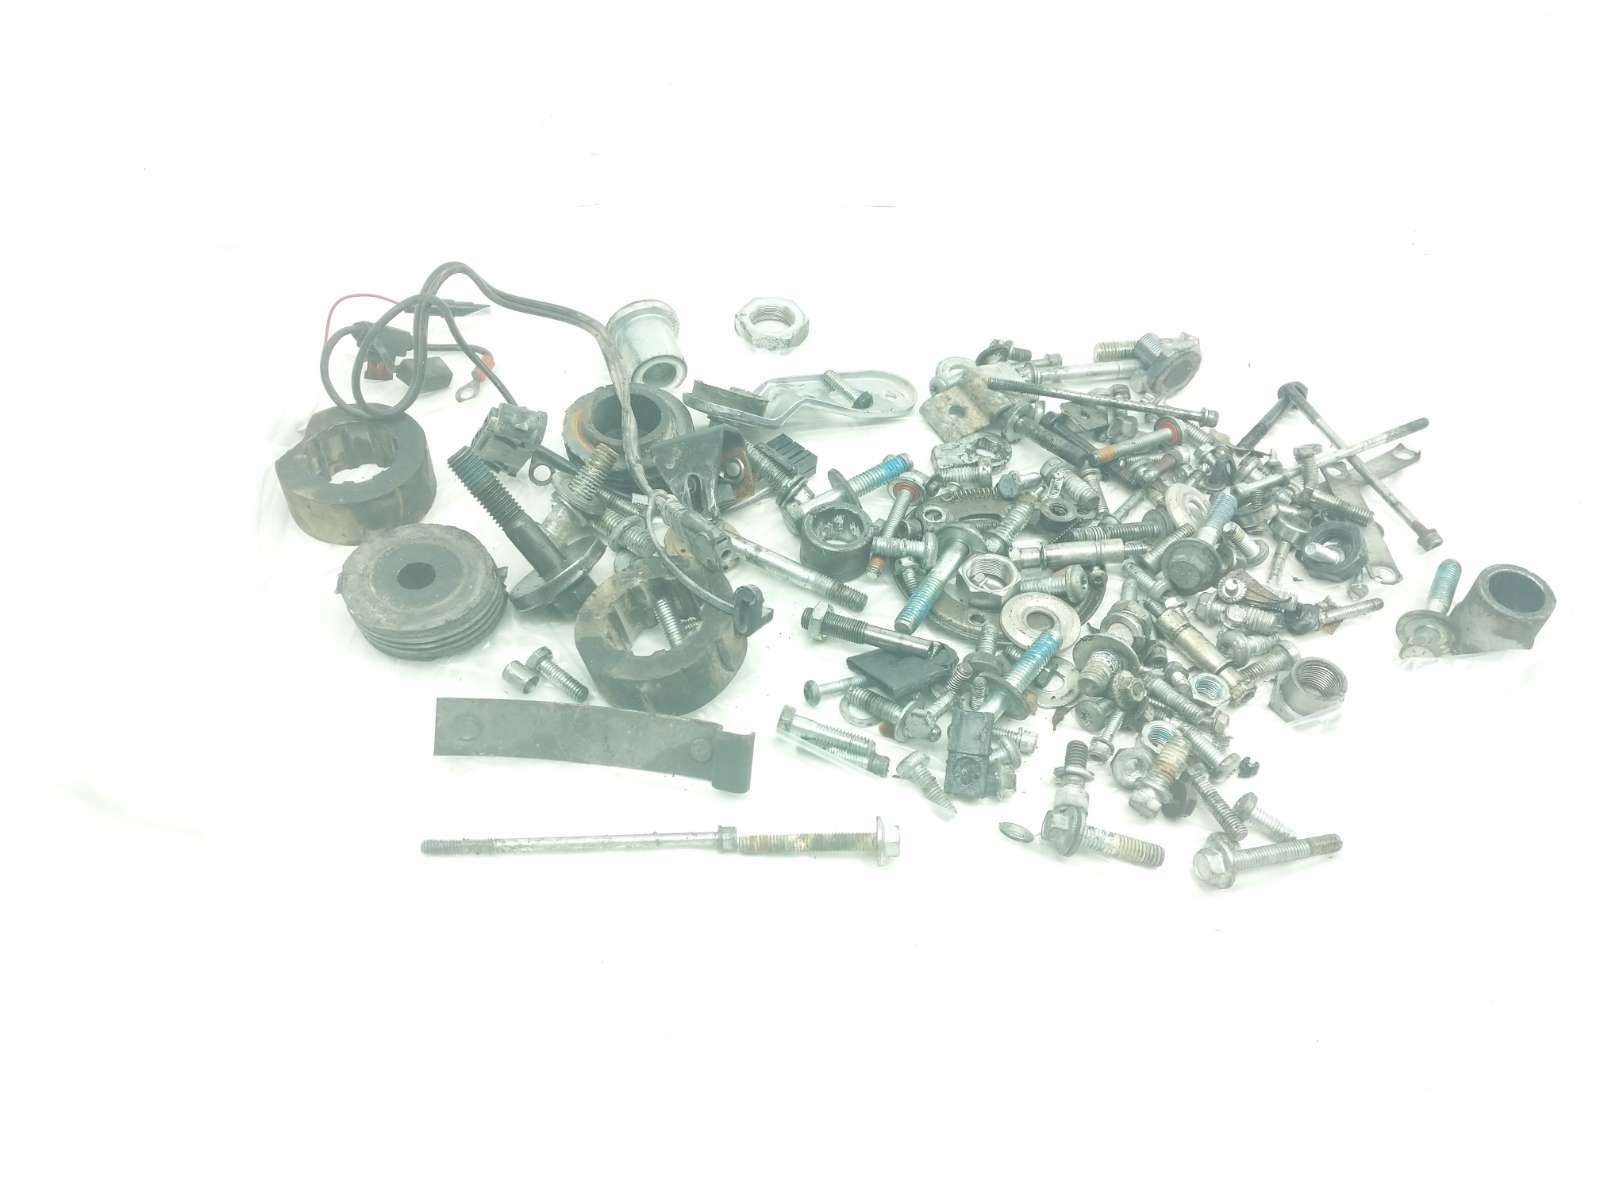 07 Harley Ultra Classic Electra Glide FLHTCUI Miscellaneous Parts Master Hardware Bolt Kit